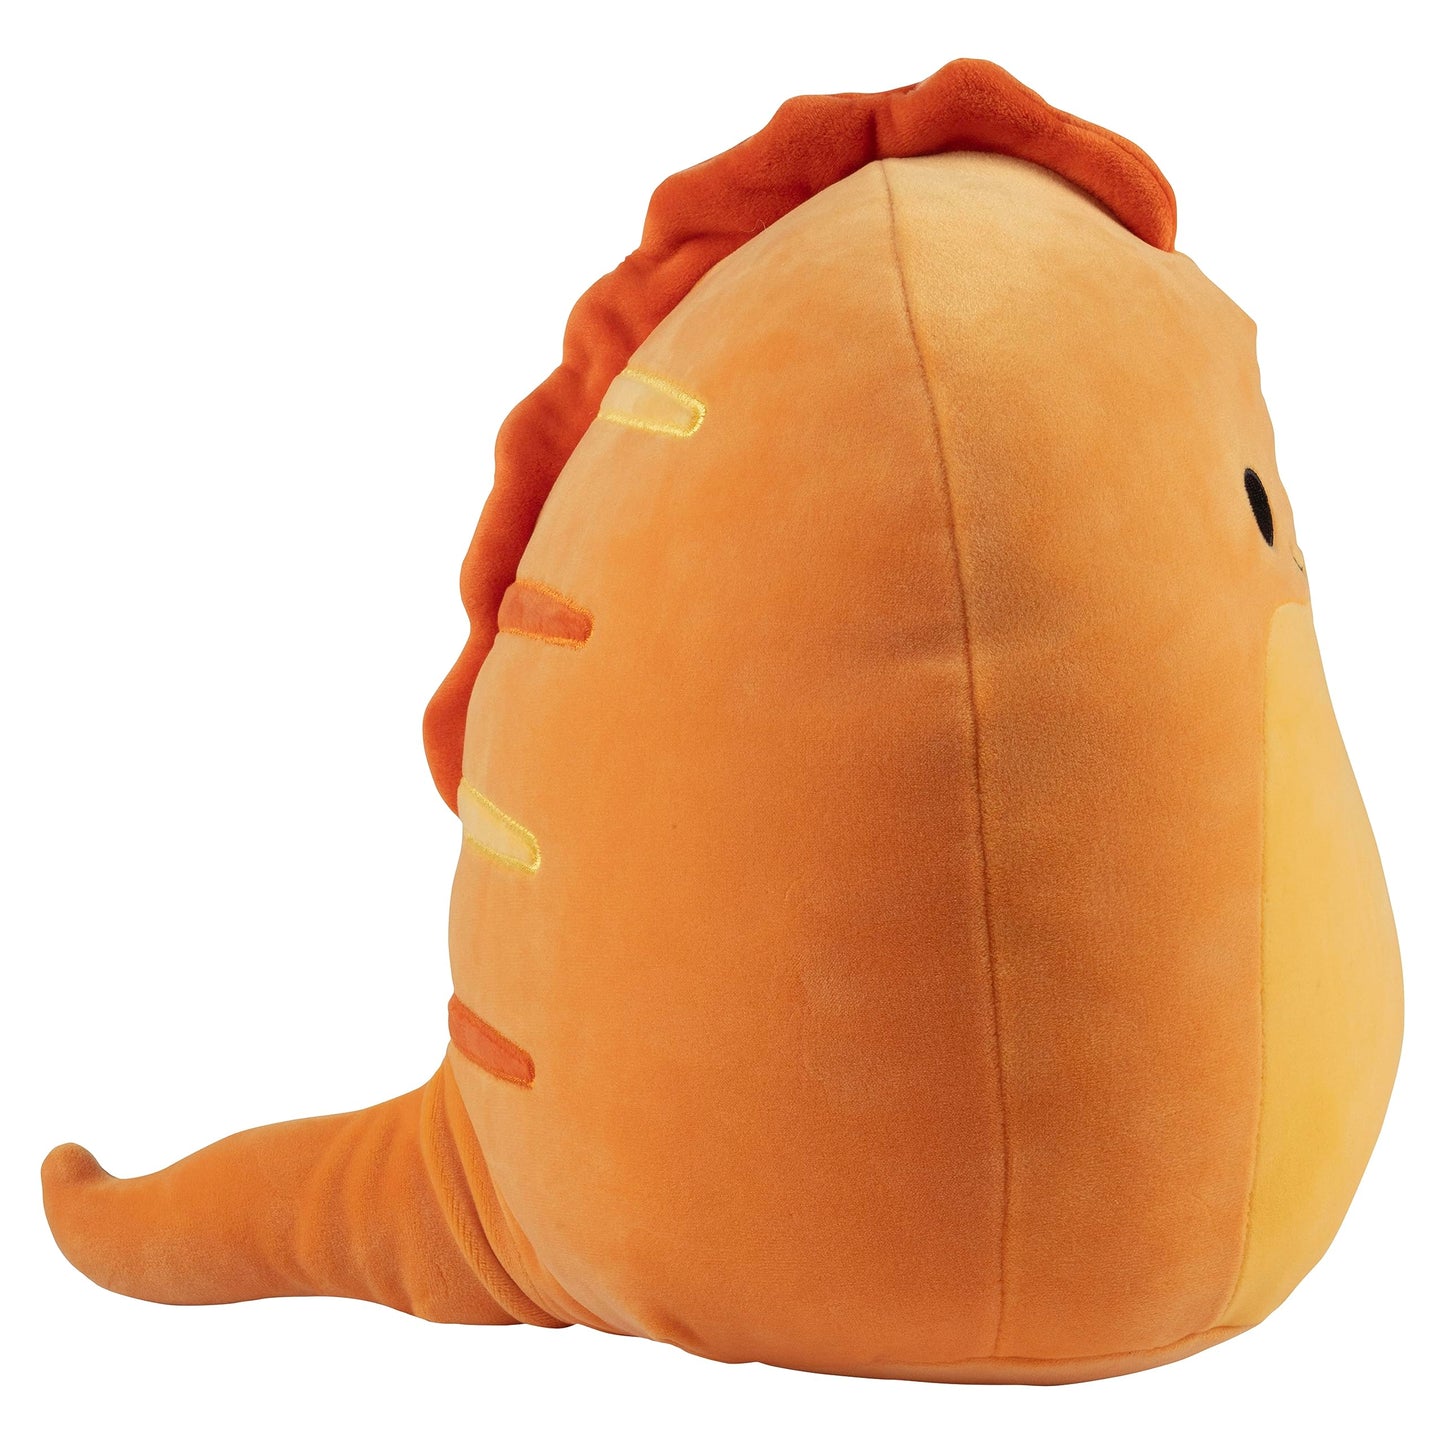 Squishmallows Original 10-Inch Onel The Orange Electric EEL - Official Jazwares Plush - Collectible Cute Soft & Squishy Stuffed Animal Toy - Add to Your Squad - Gift for Kids, Girls & Boys